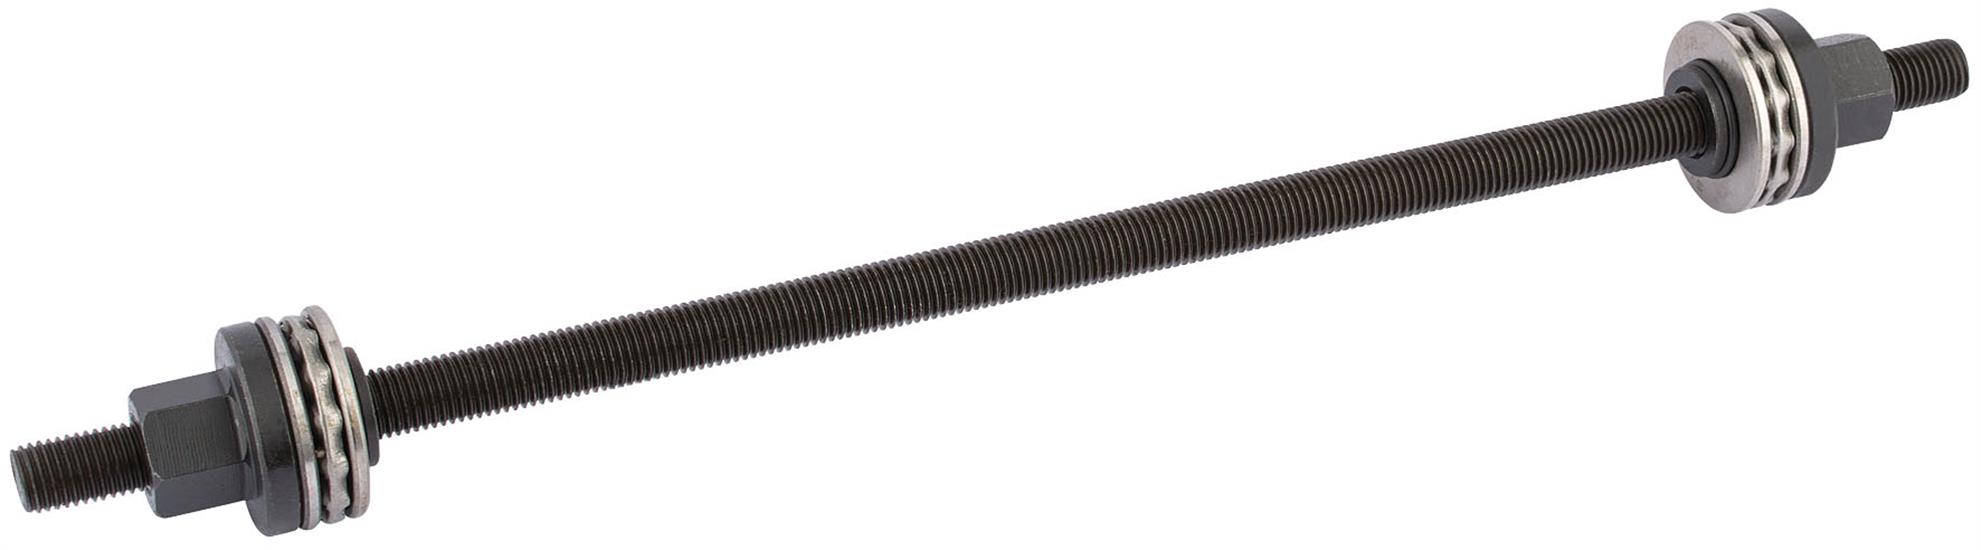 Draper 81036 (YBPK27) - M12 Spare Threaded Rod and Bearing for 59123 and 30816 Extraction Kit